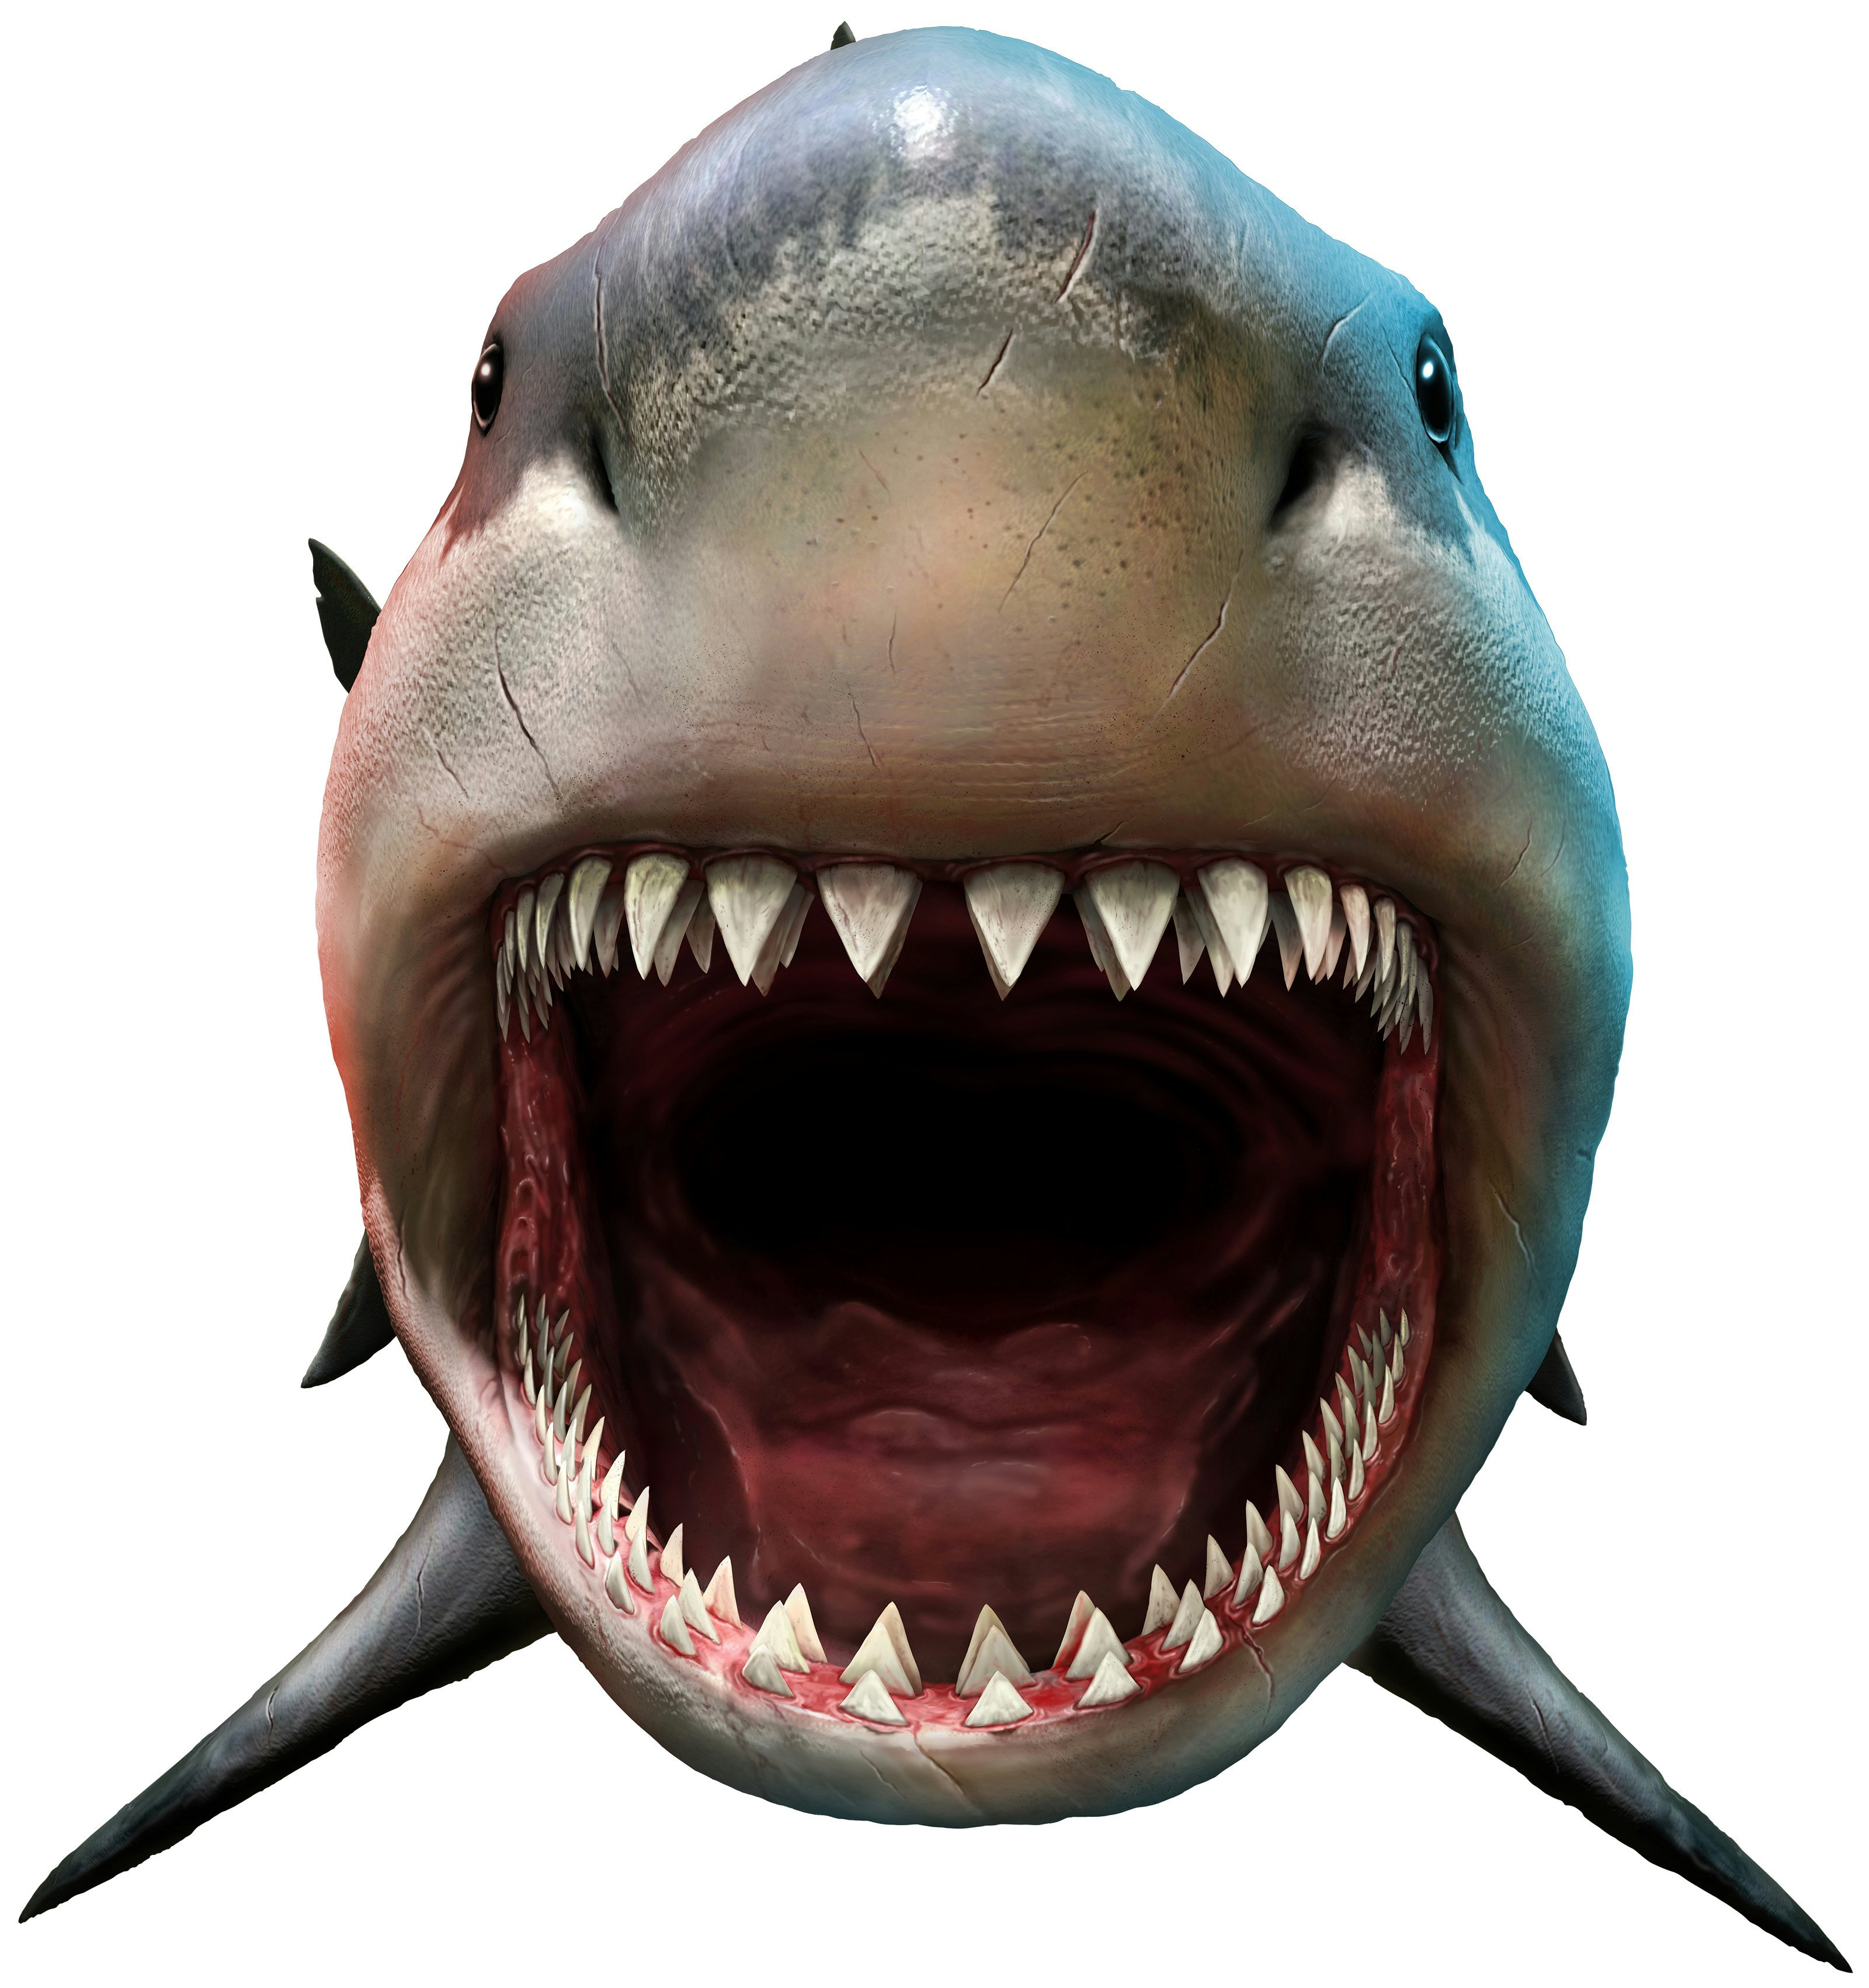 Megalodon: This ancient predator gave birth to babies the size of adult  humans